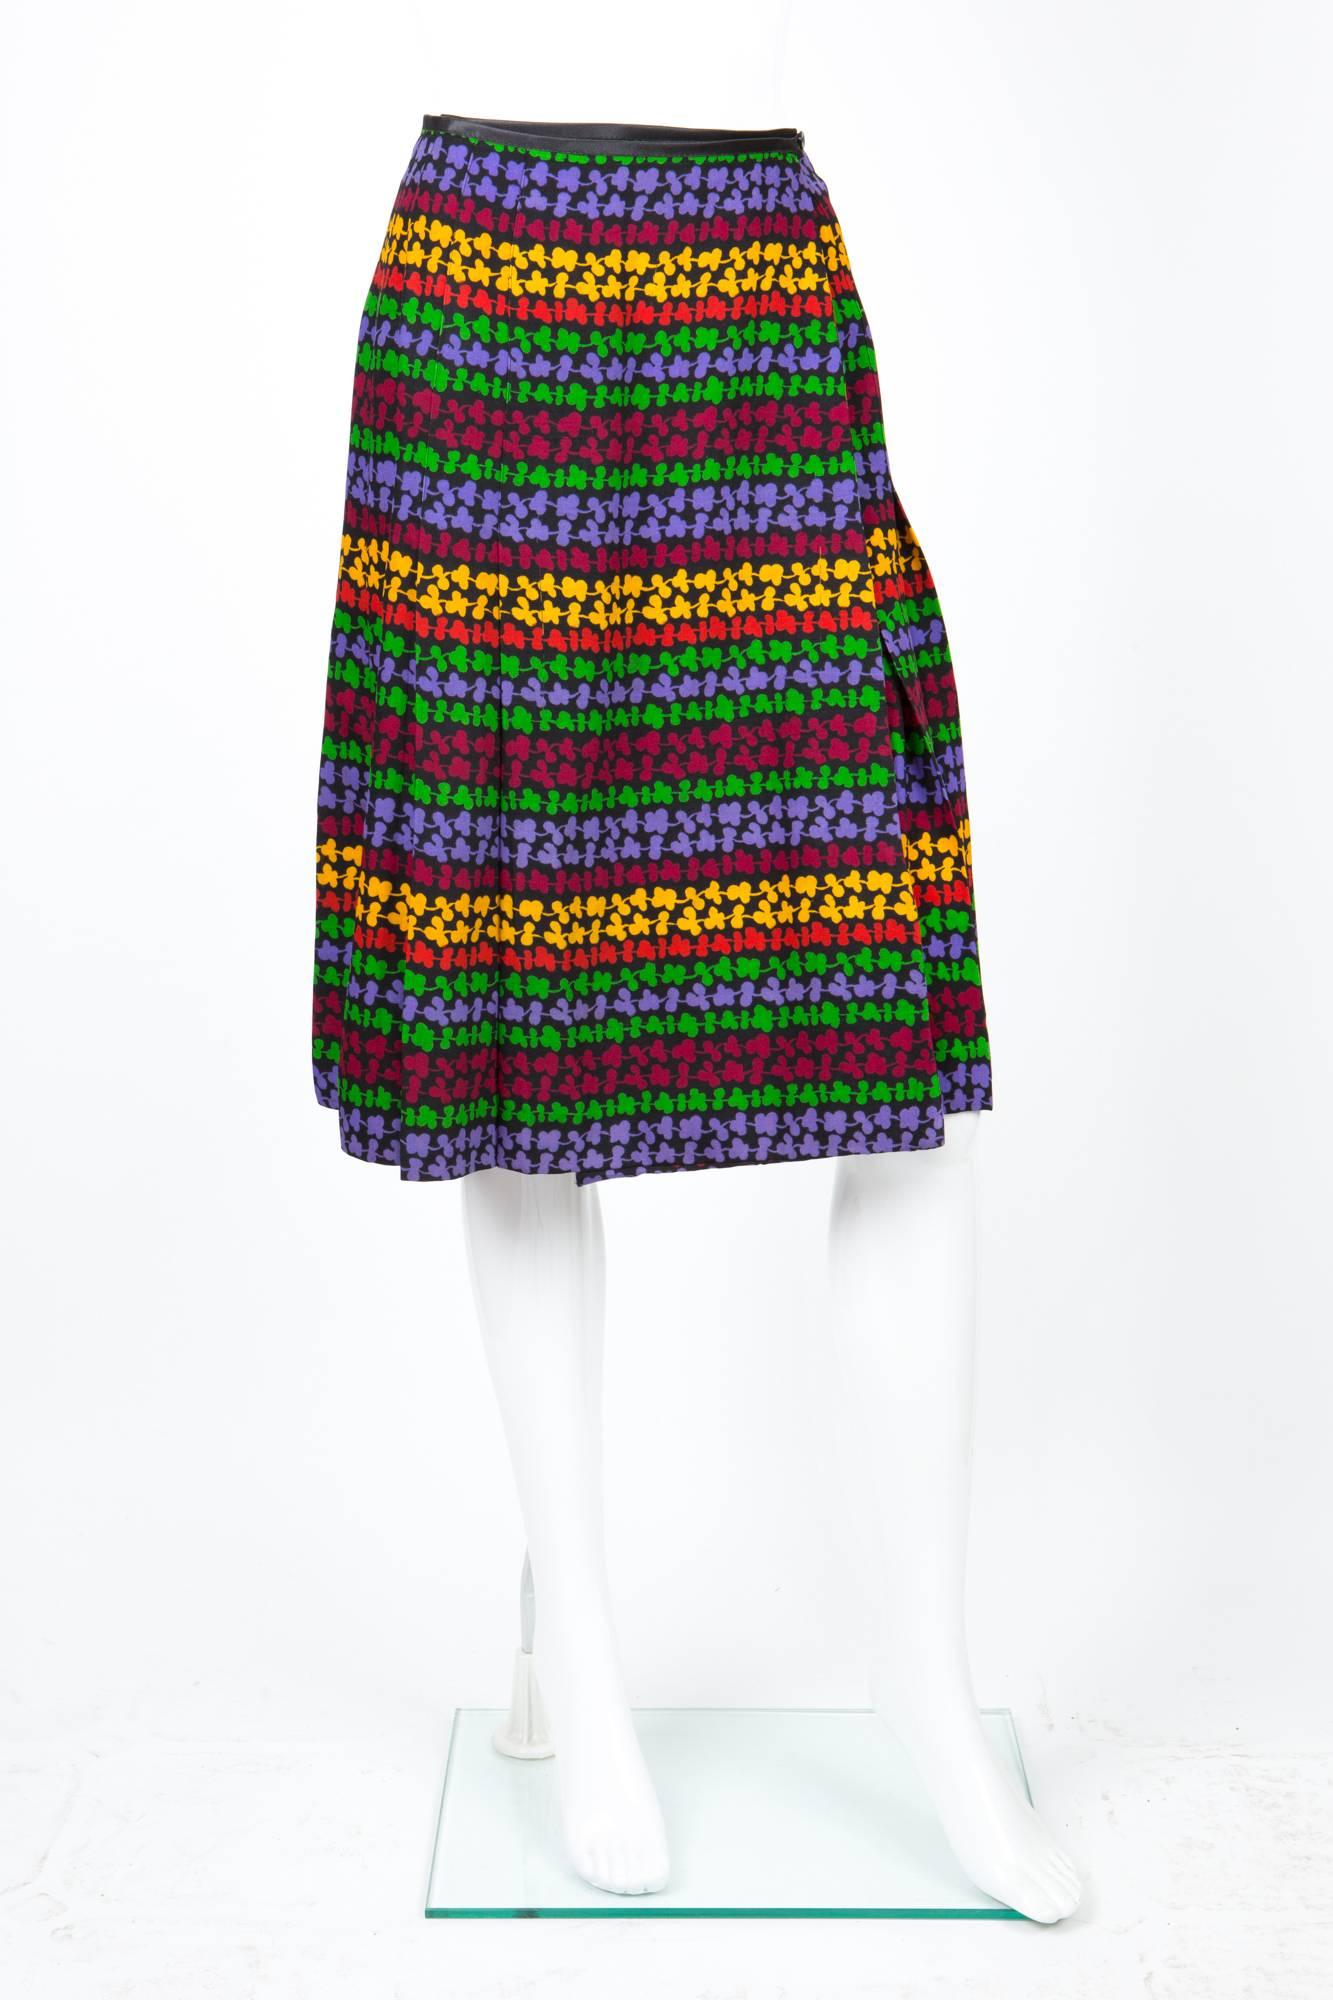 Saint Laurent multicolored wool etamine wrapped skirt featuring a multicolored print on a black ground, a thin black satin waistband.
In excellent vintage condition. Made in France.
We guarantee you will receive this iconic skirt as described and